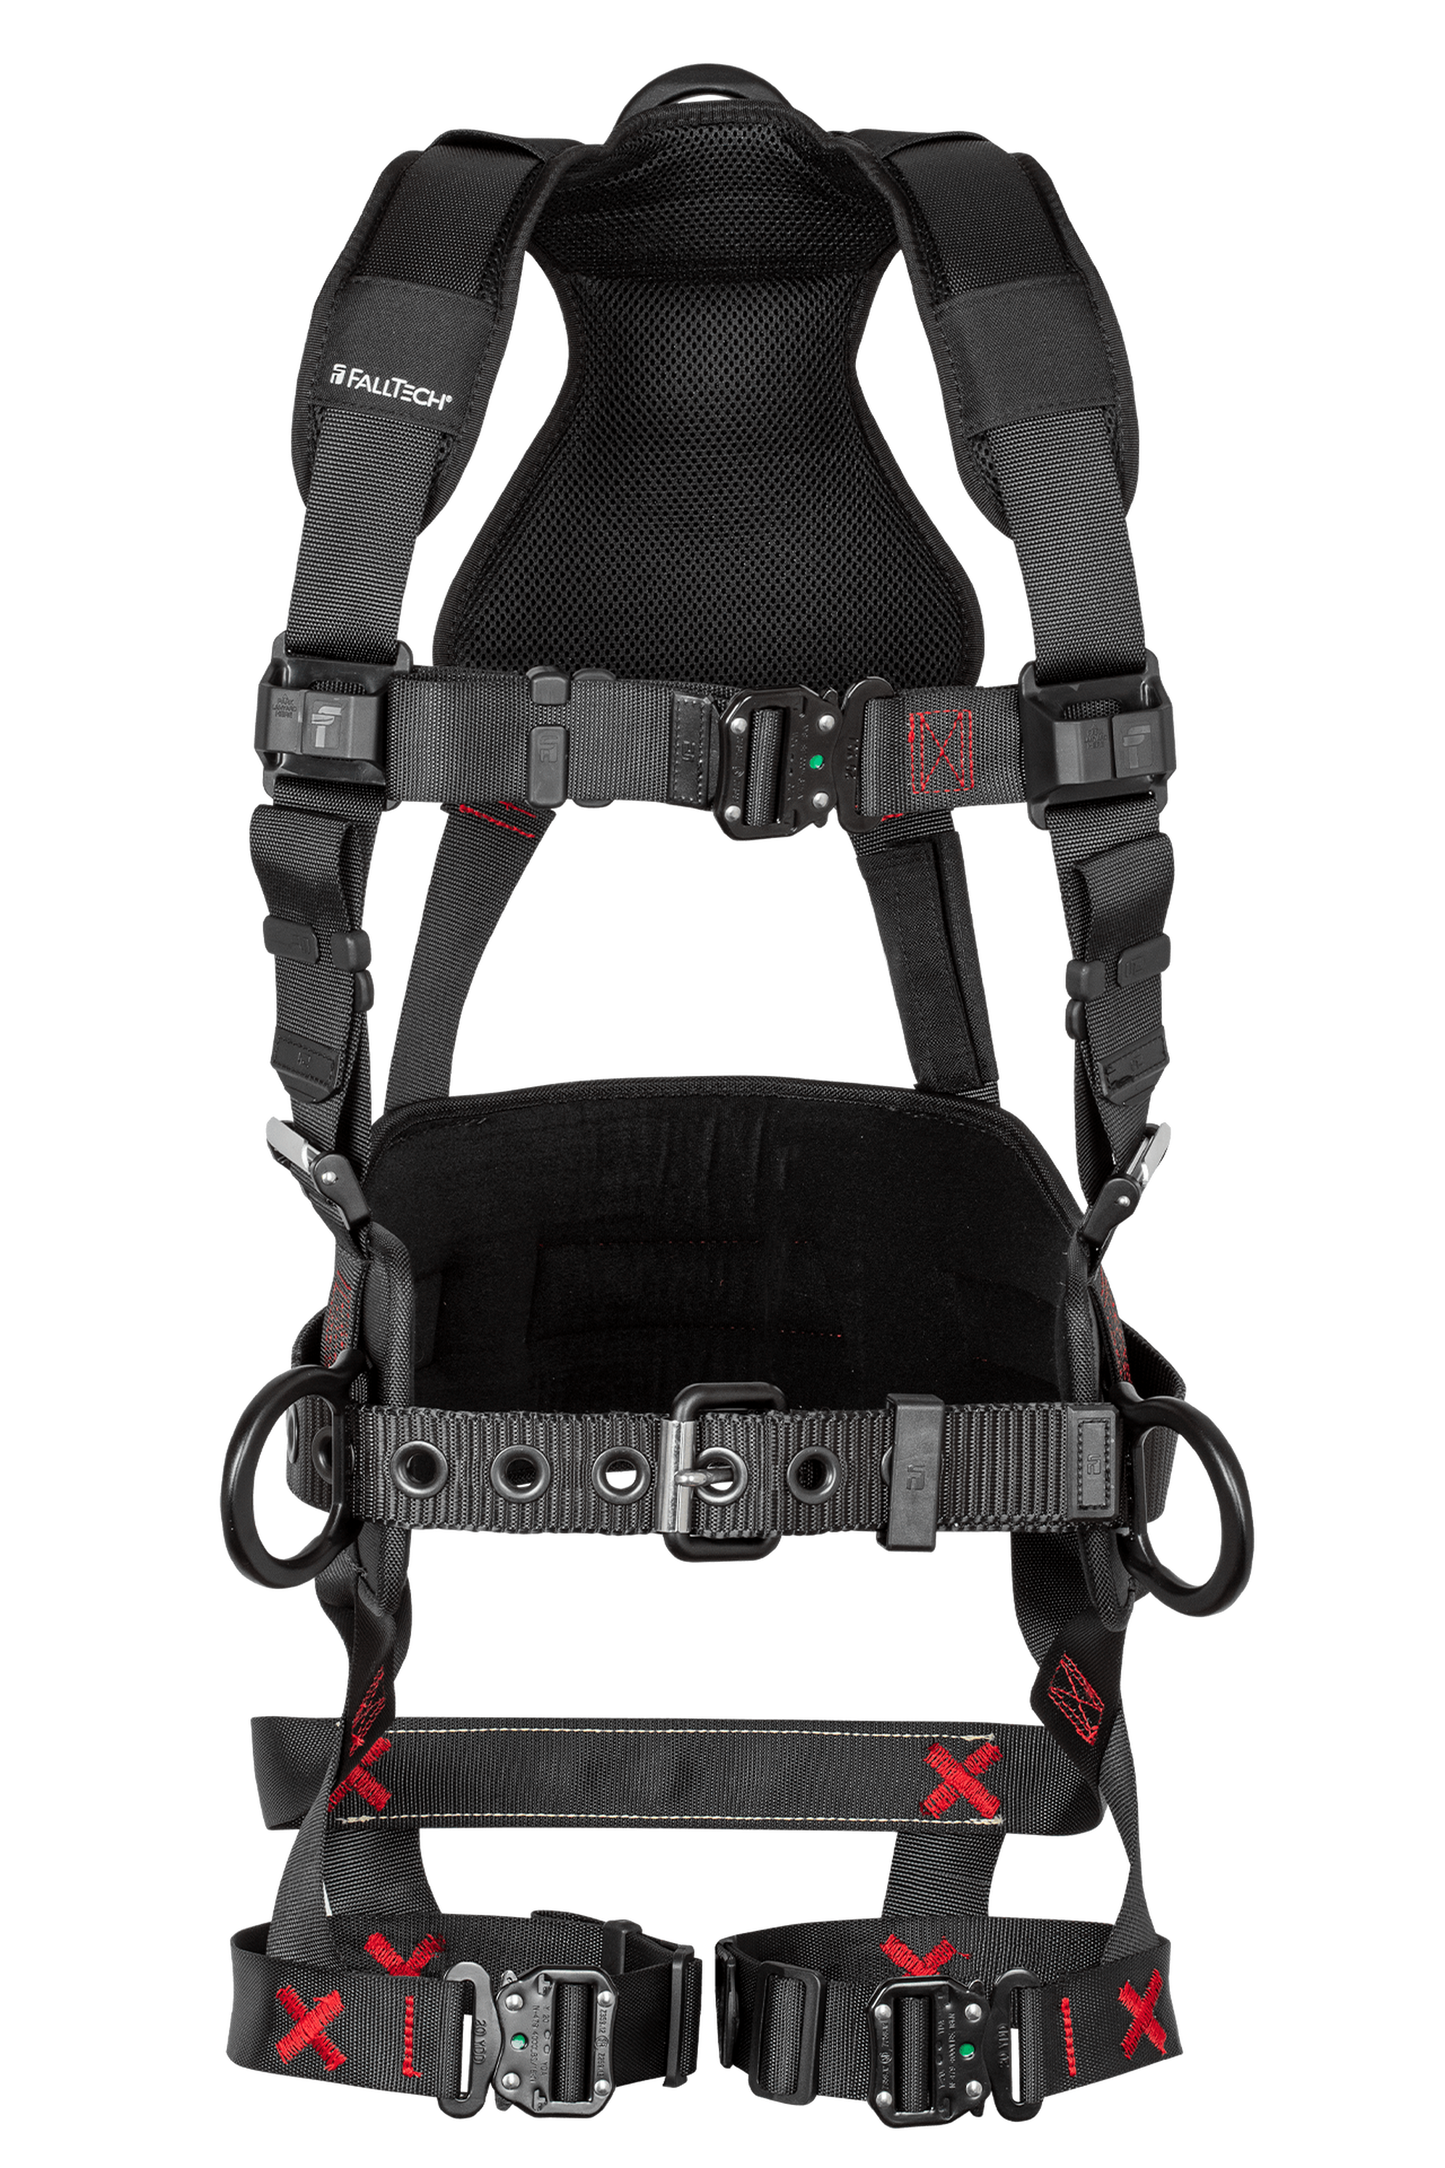 FT-Iron Fall Protection Safety Harness with Integrated Tool Belt, Quick Connect Leg Adjustment